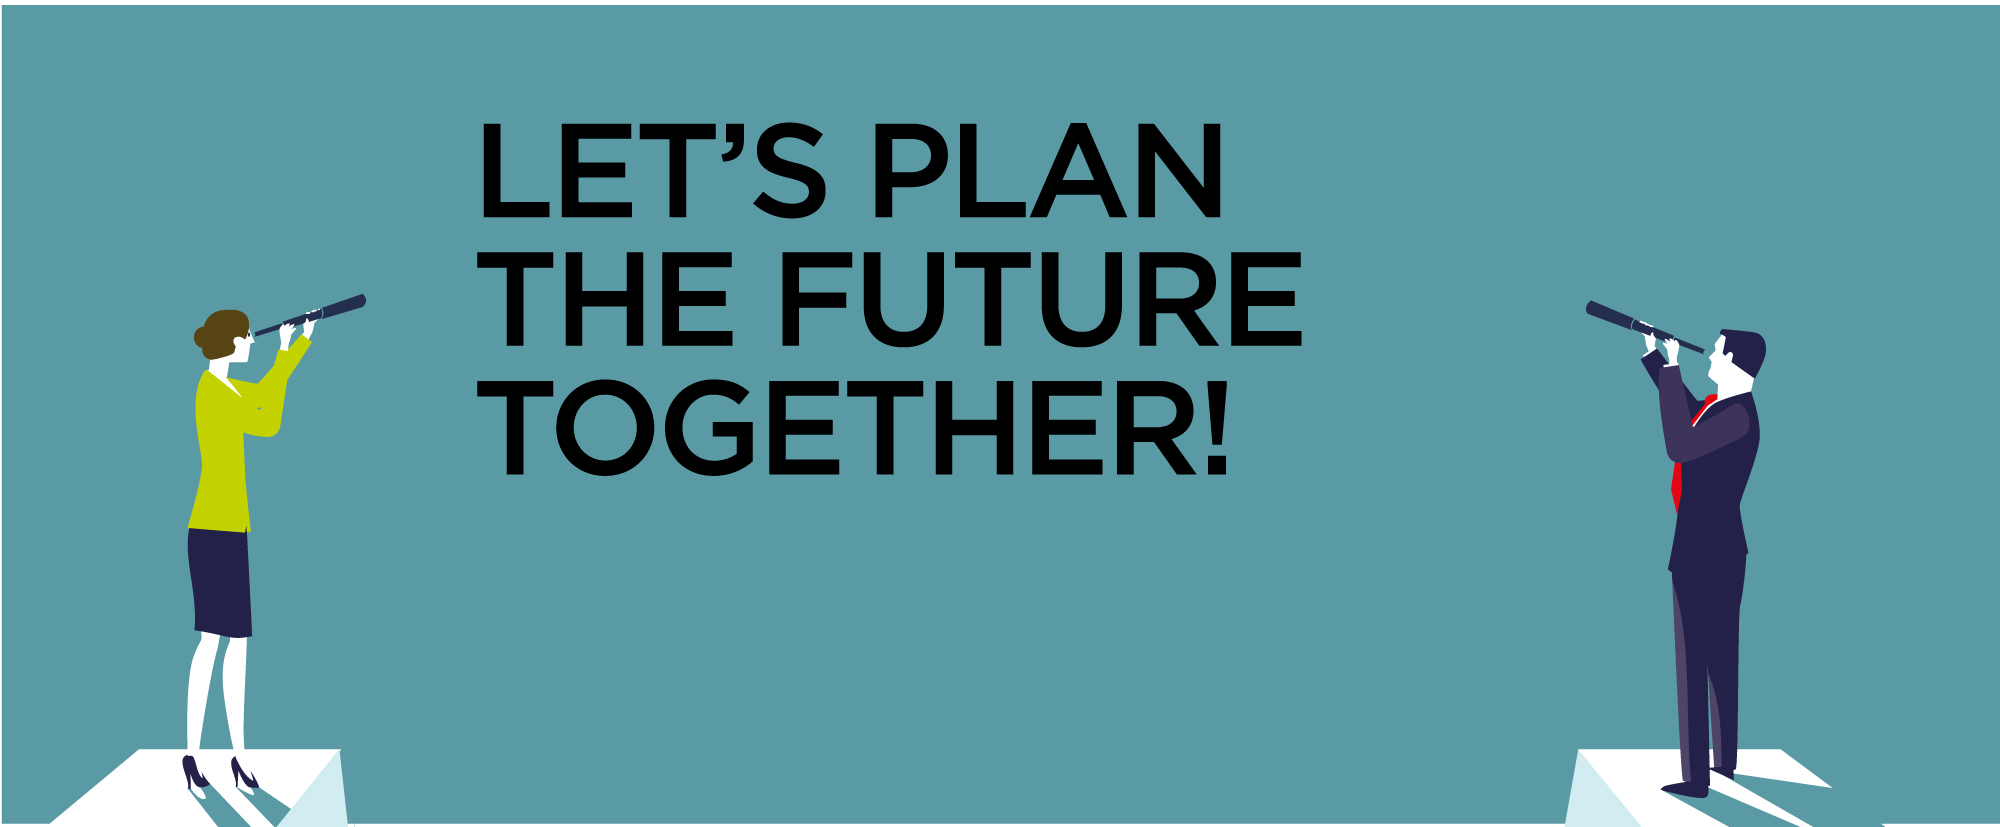 lets plan the future together